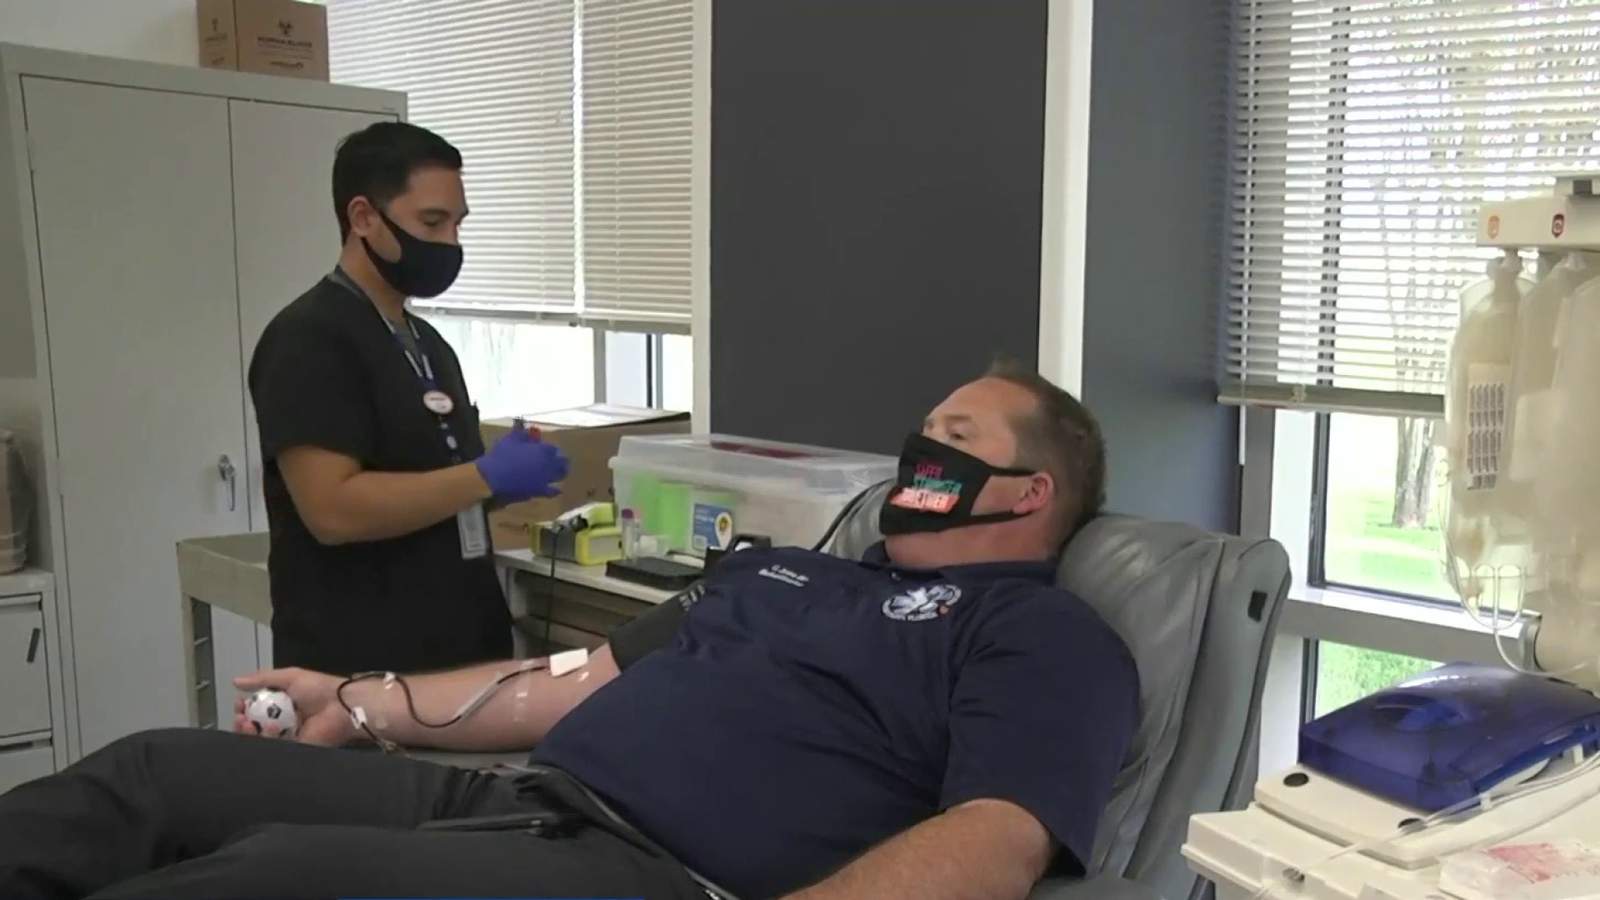 Demand for plasma, blood donations remains high as pandemic rages